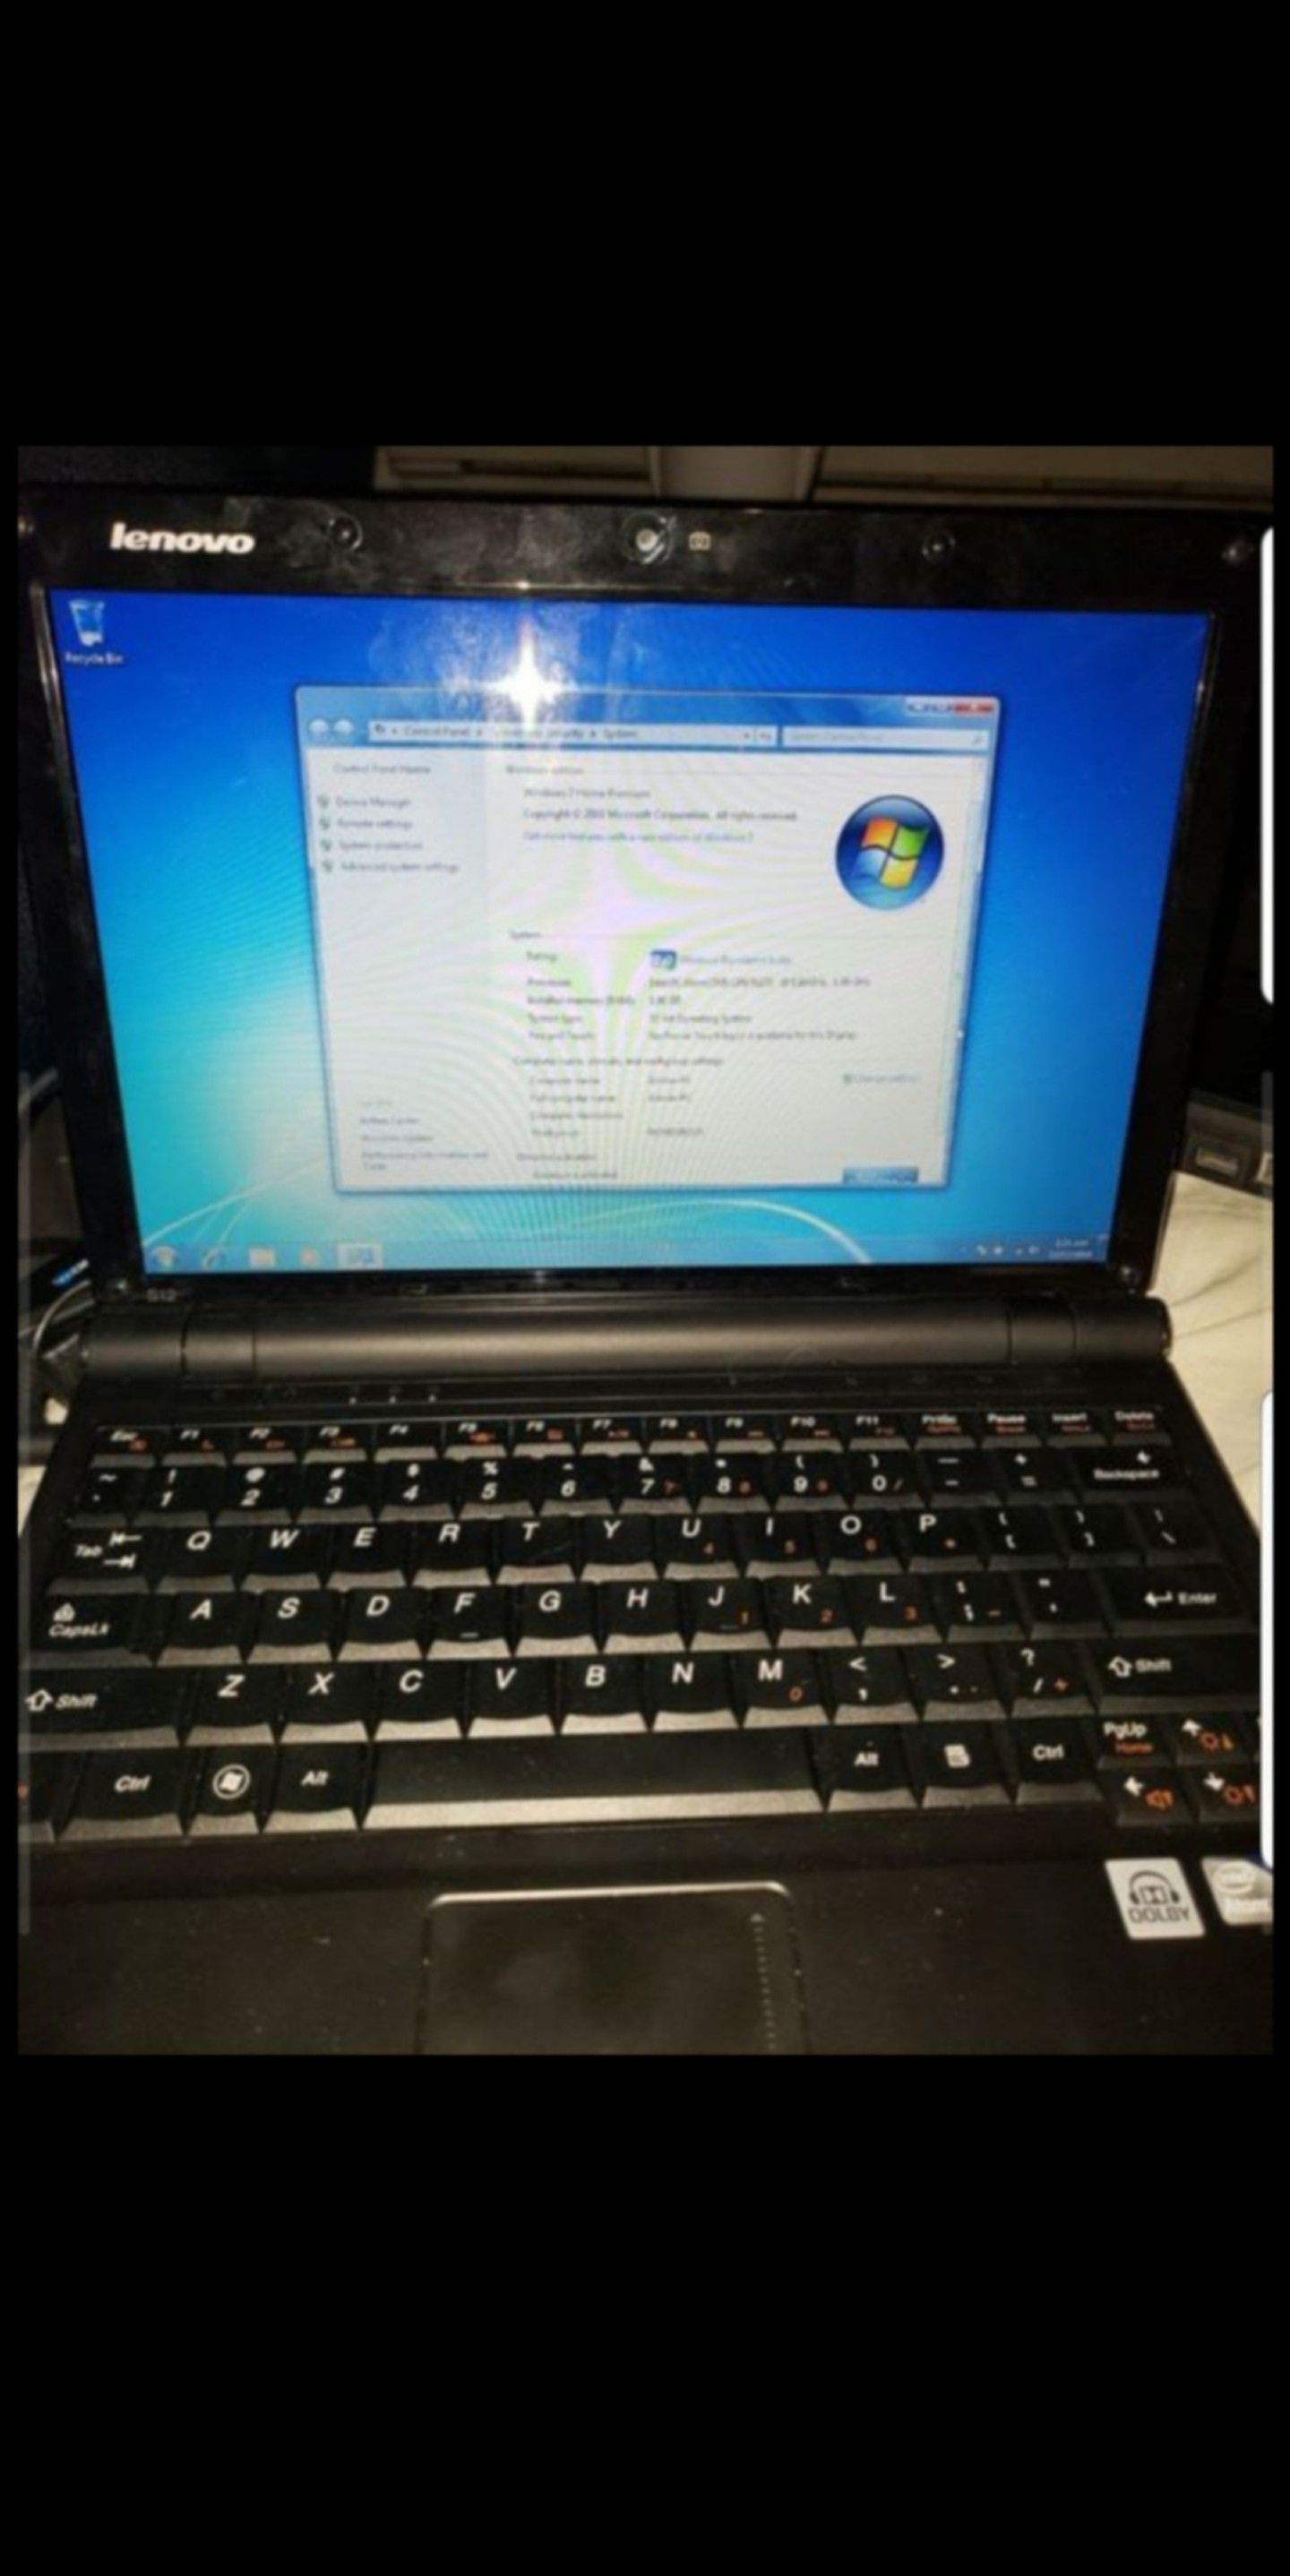 Lenovo Ideapad S12 12" Laptop PC For office and students